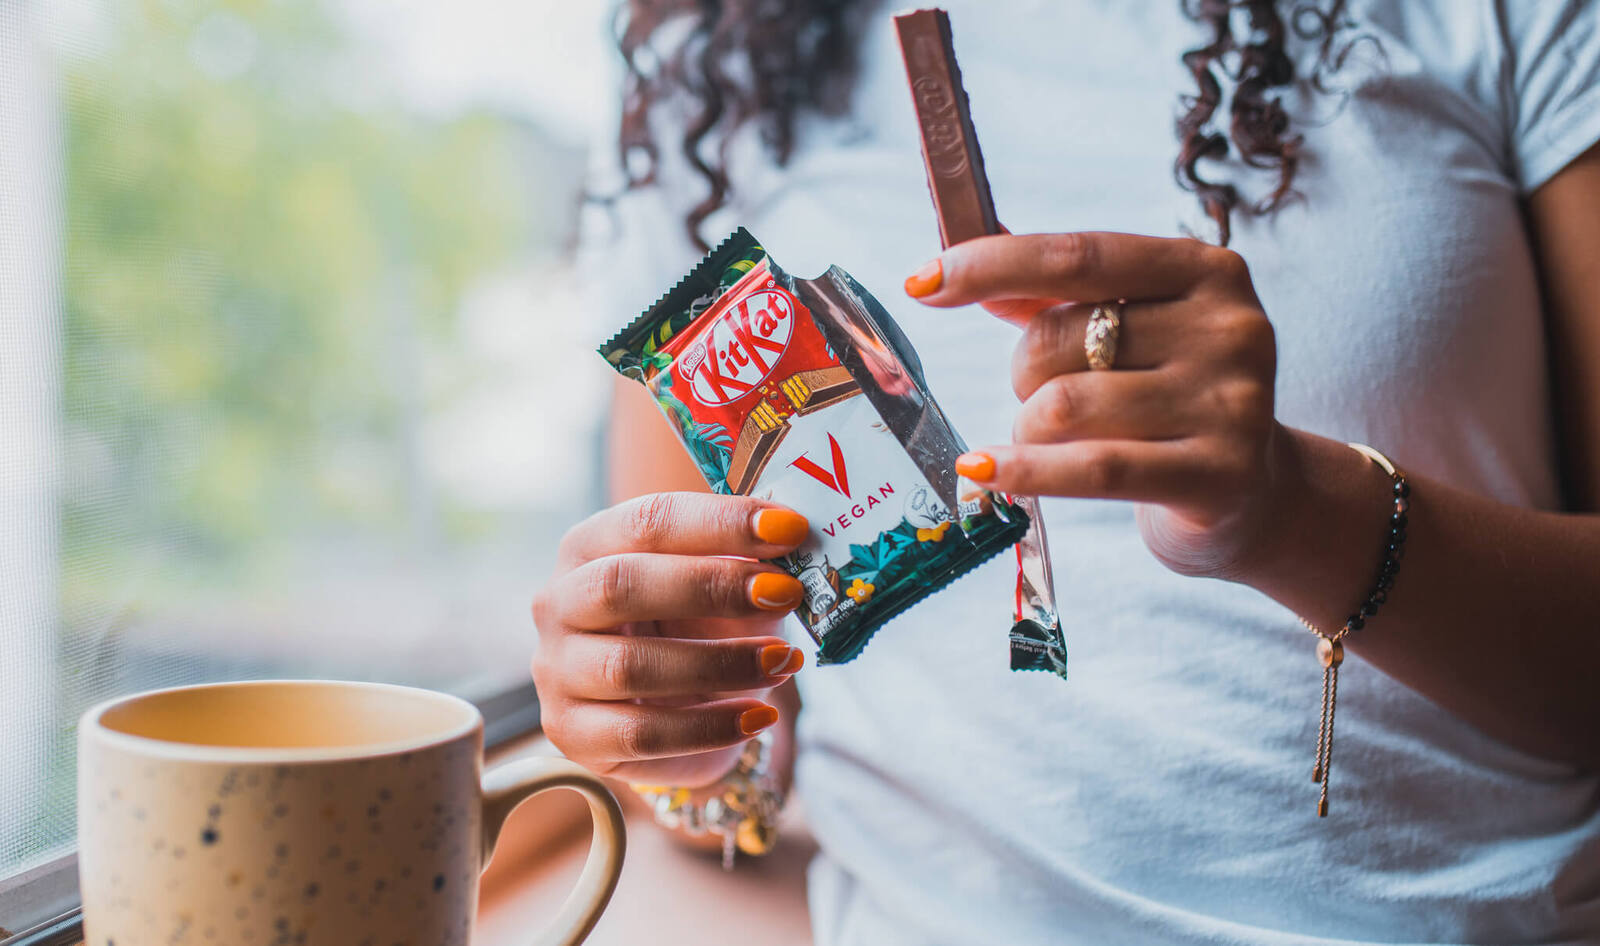 Vegan KitKat Is Rolling Out Across 15 Countries. Here's Where You Can Find It.